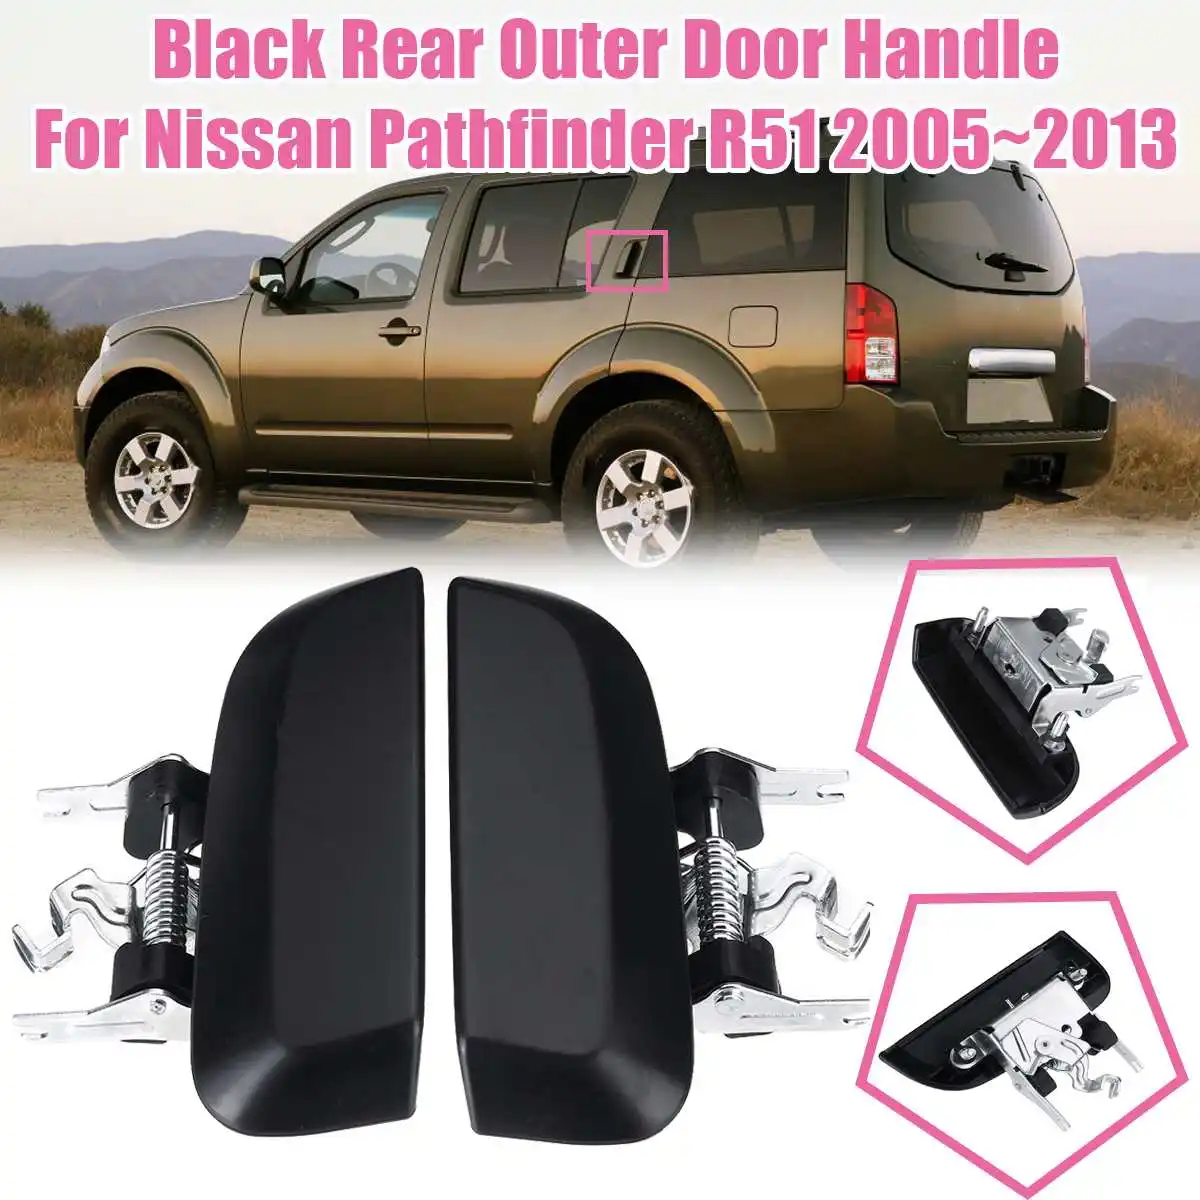 

Rear Door Outer Handle Left / Right Side For Nissan Pathfinder R51 2005 2006 2007 2008 2009 2010 2011 2012 2013